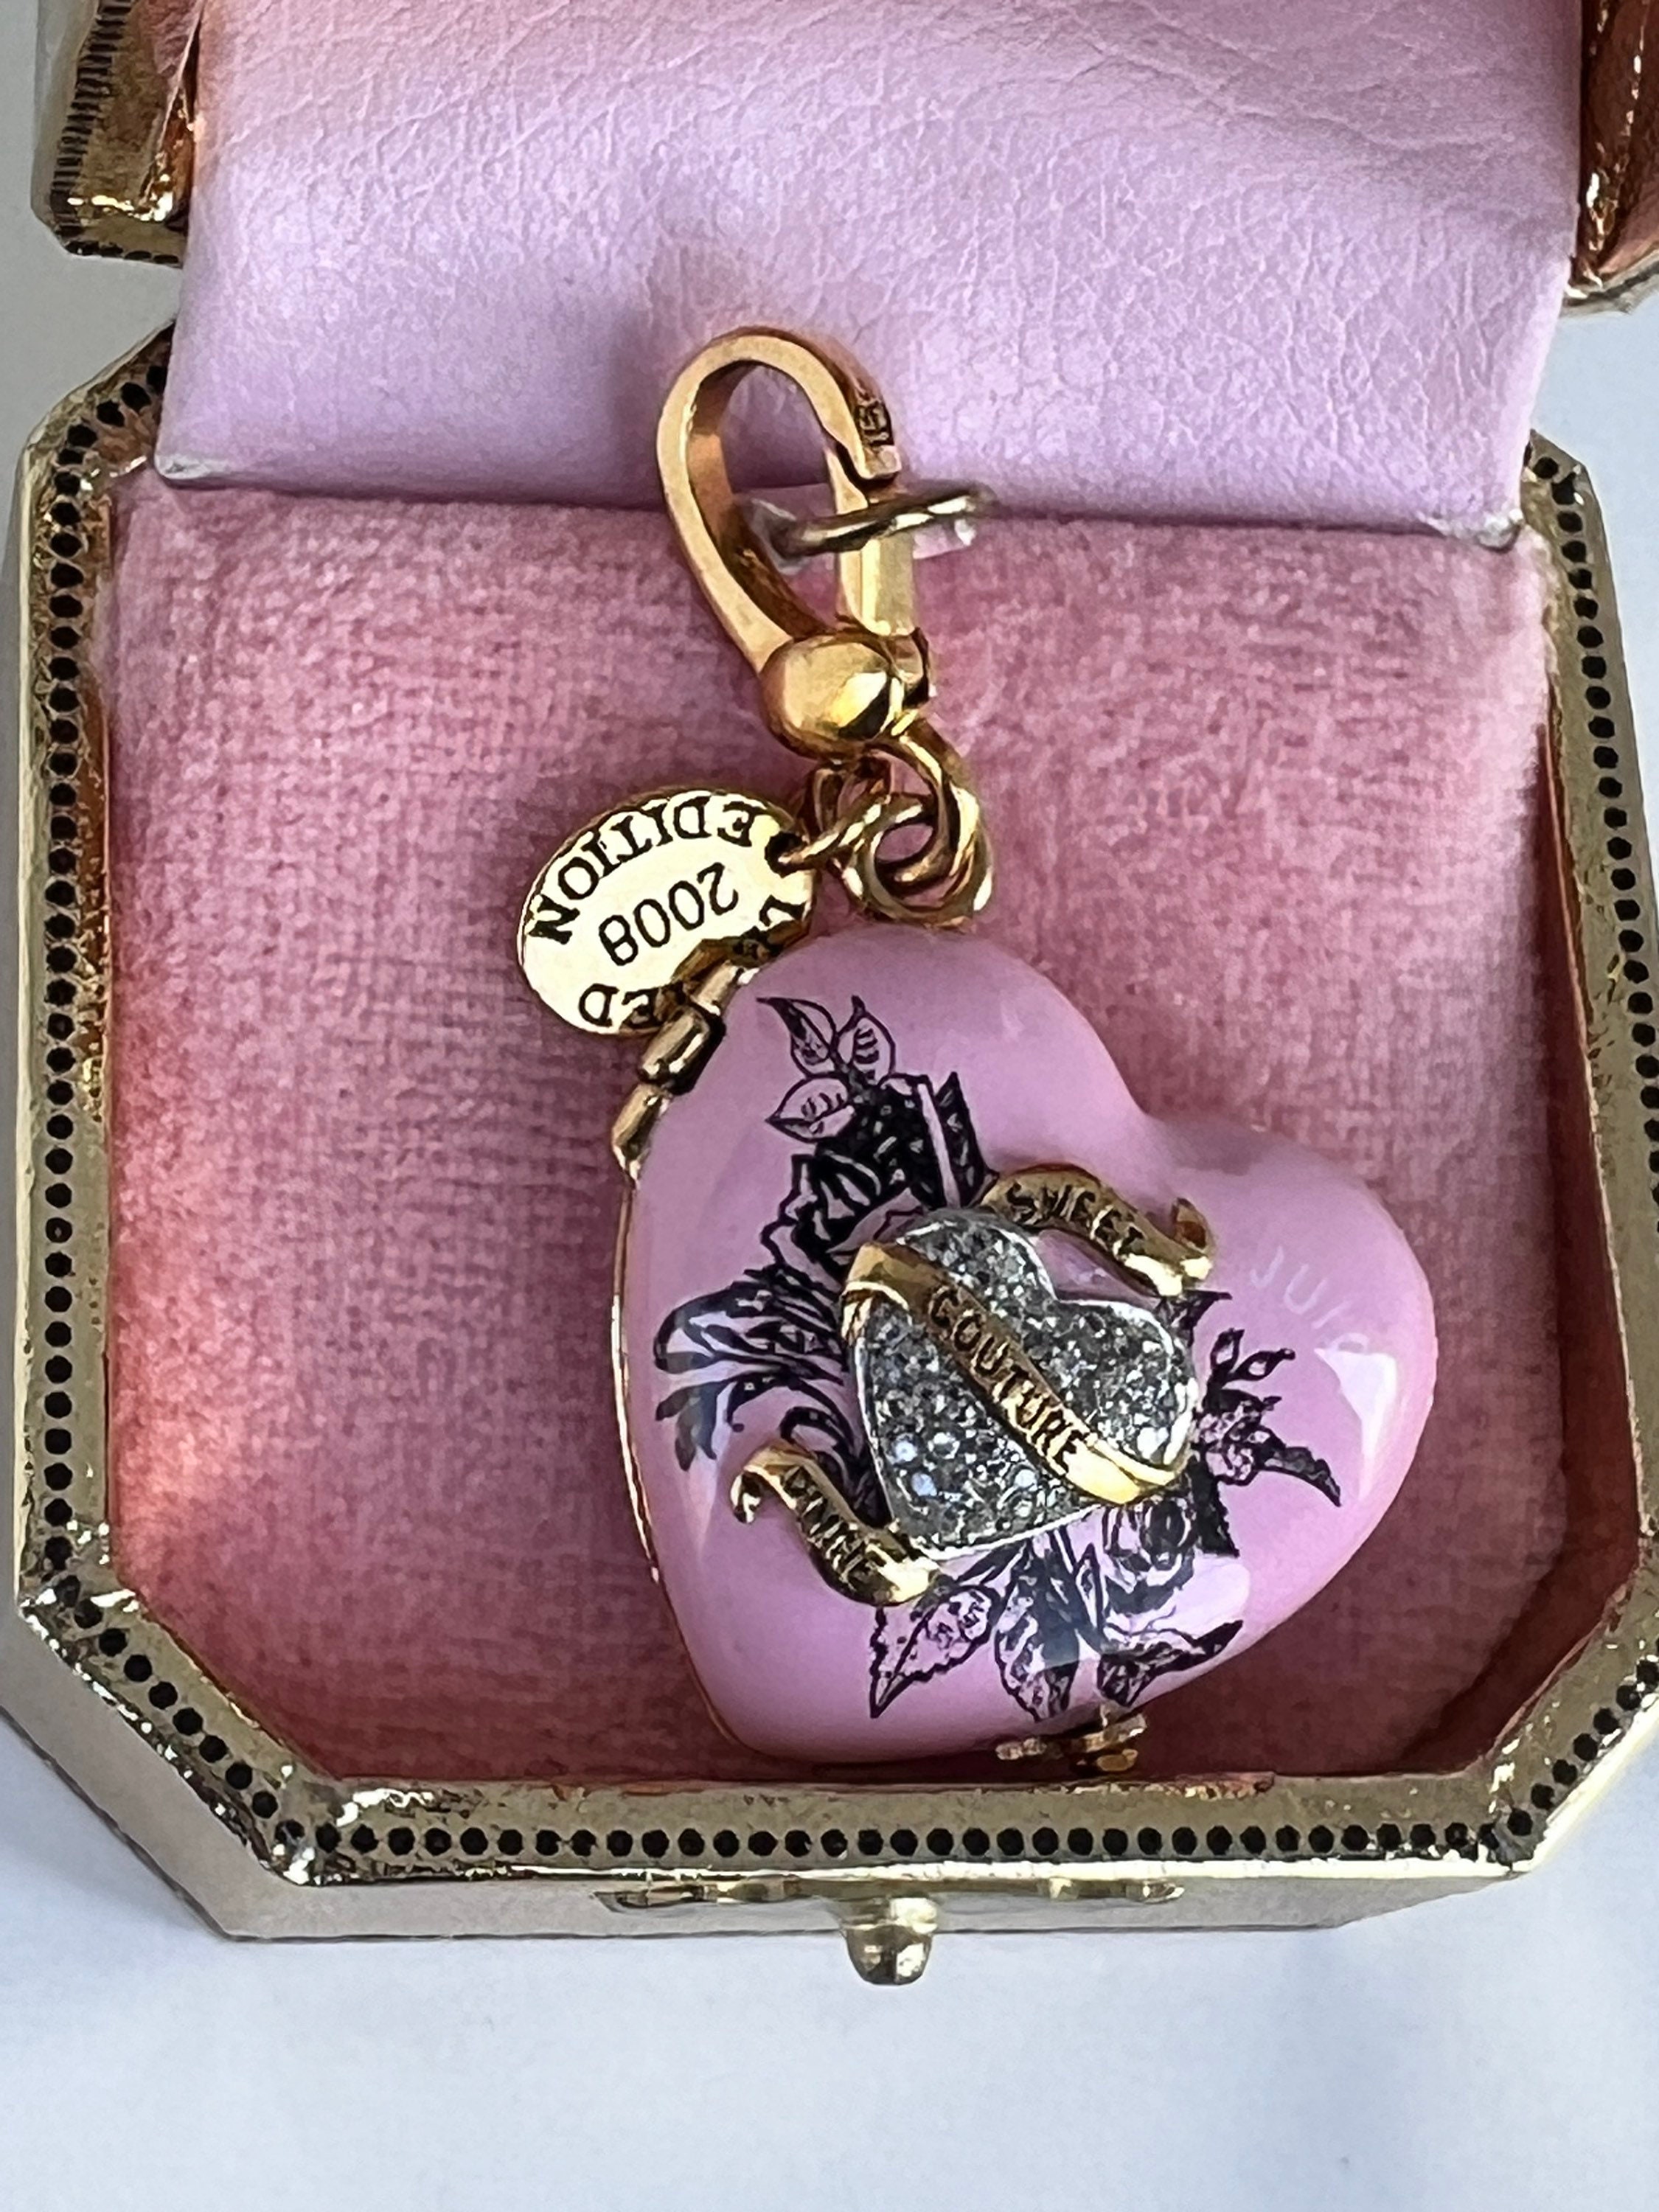 NWT Juicy Couture Pink JEWELRY CHEST Bracelet Charm -  Finland